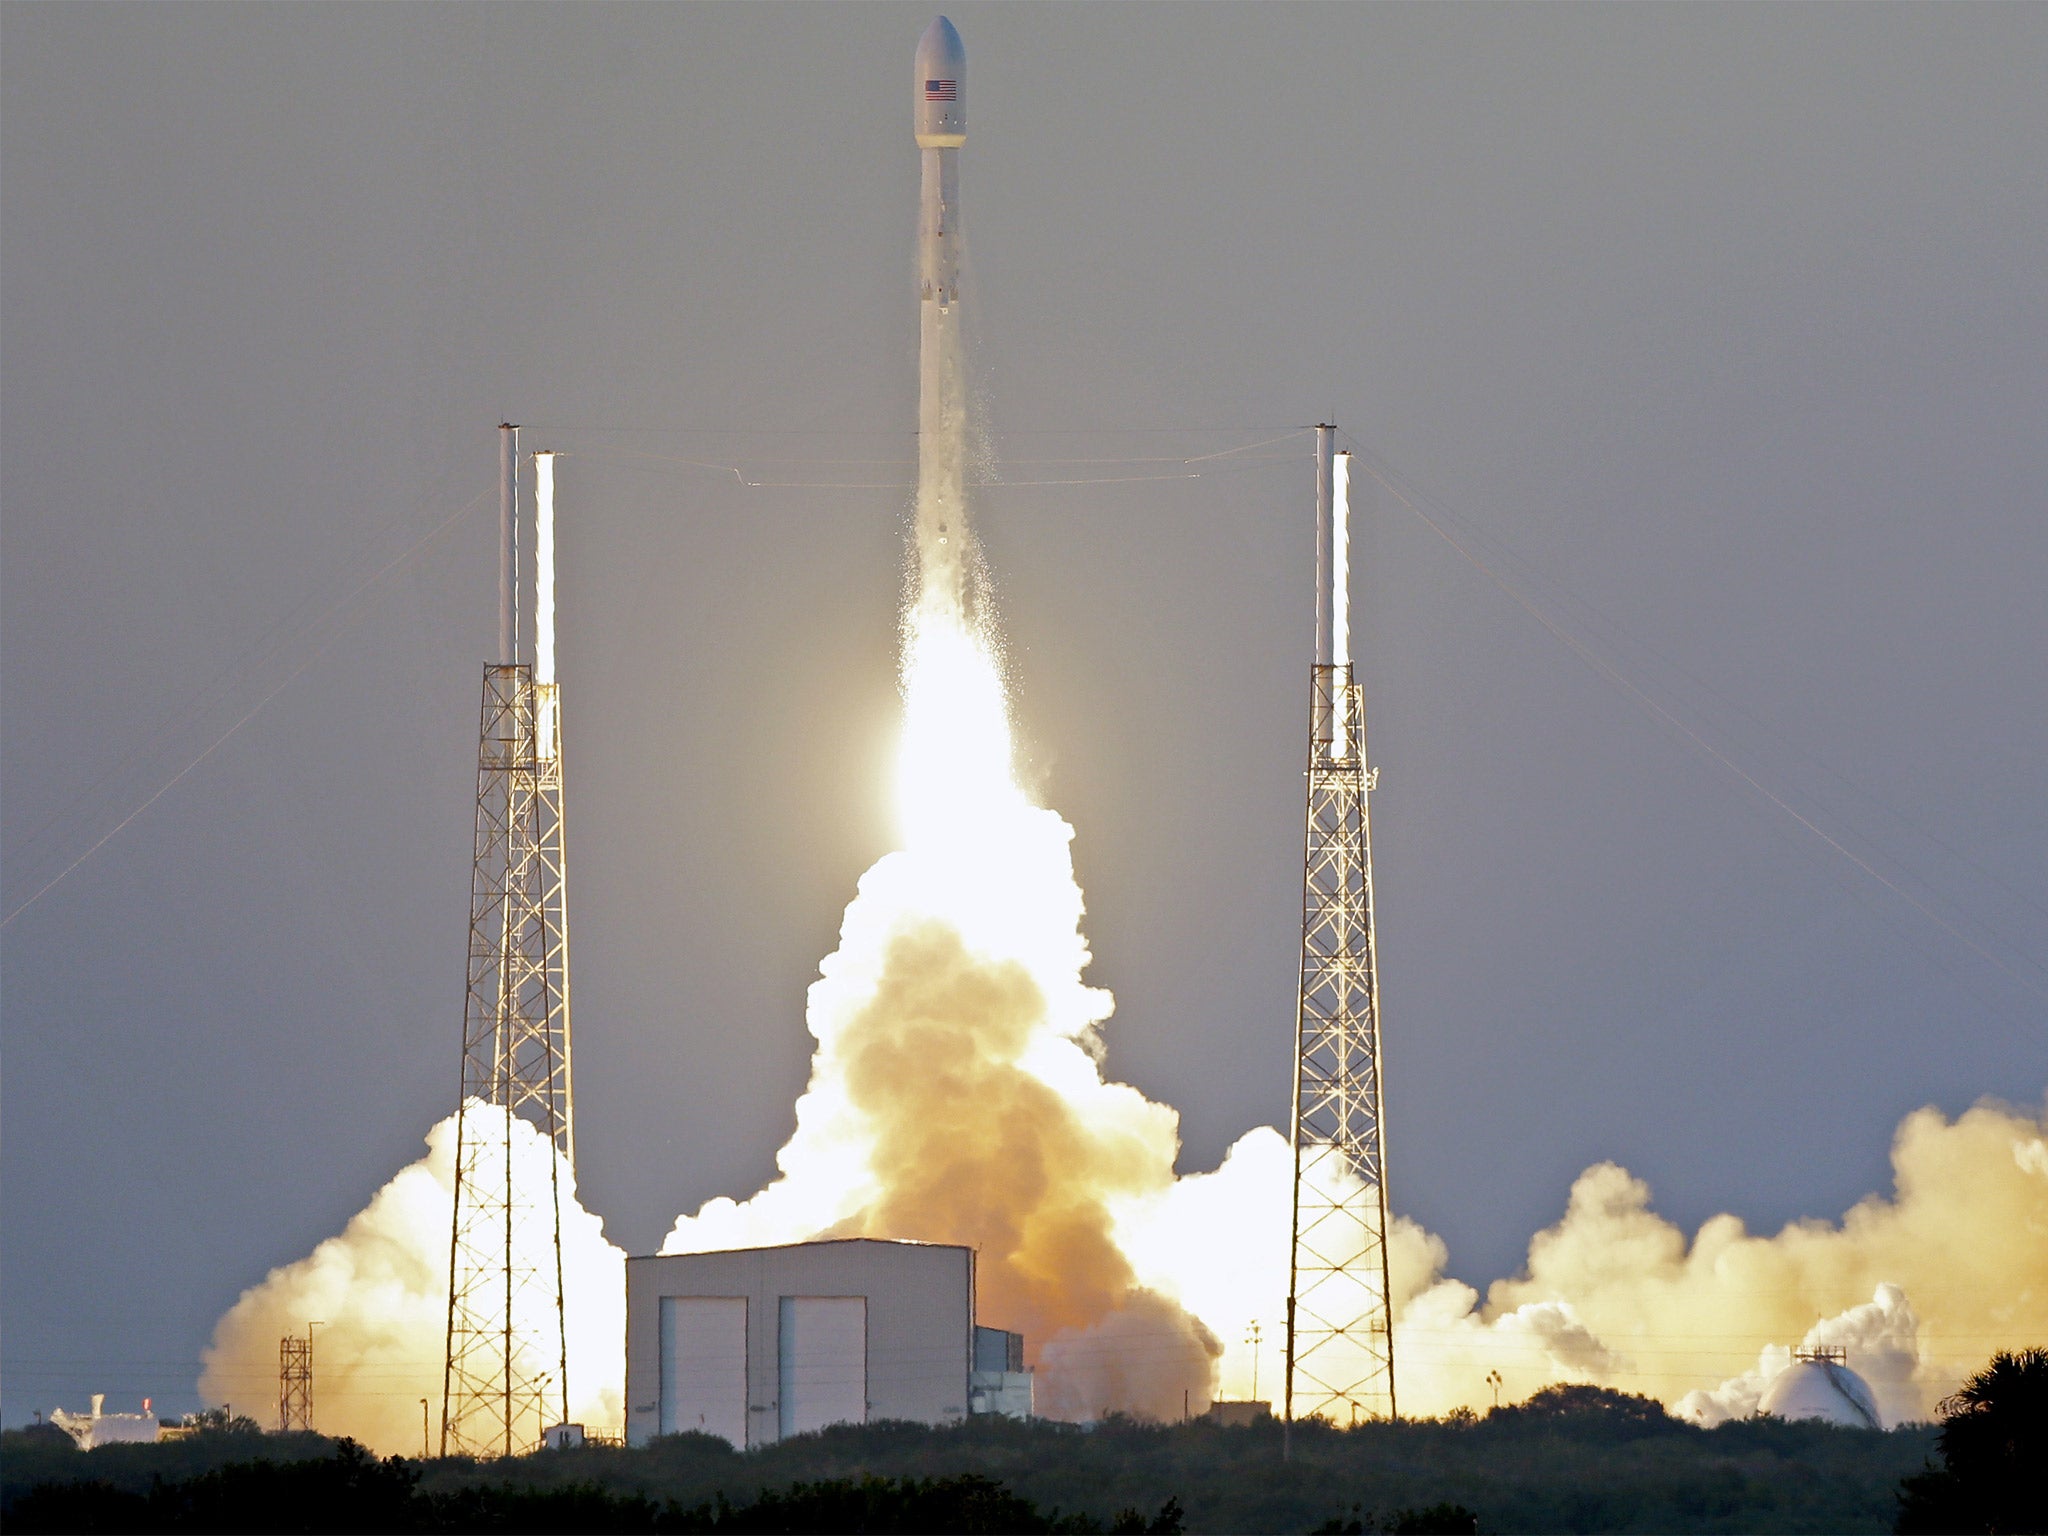 The Falcon 9 SpaceX rocket lifts off from Cape Canaveral, Florida